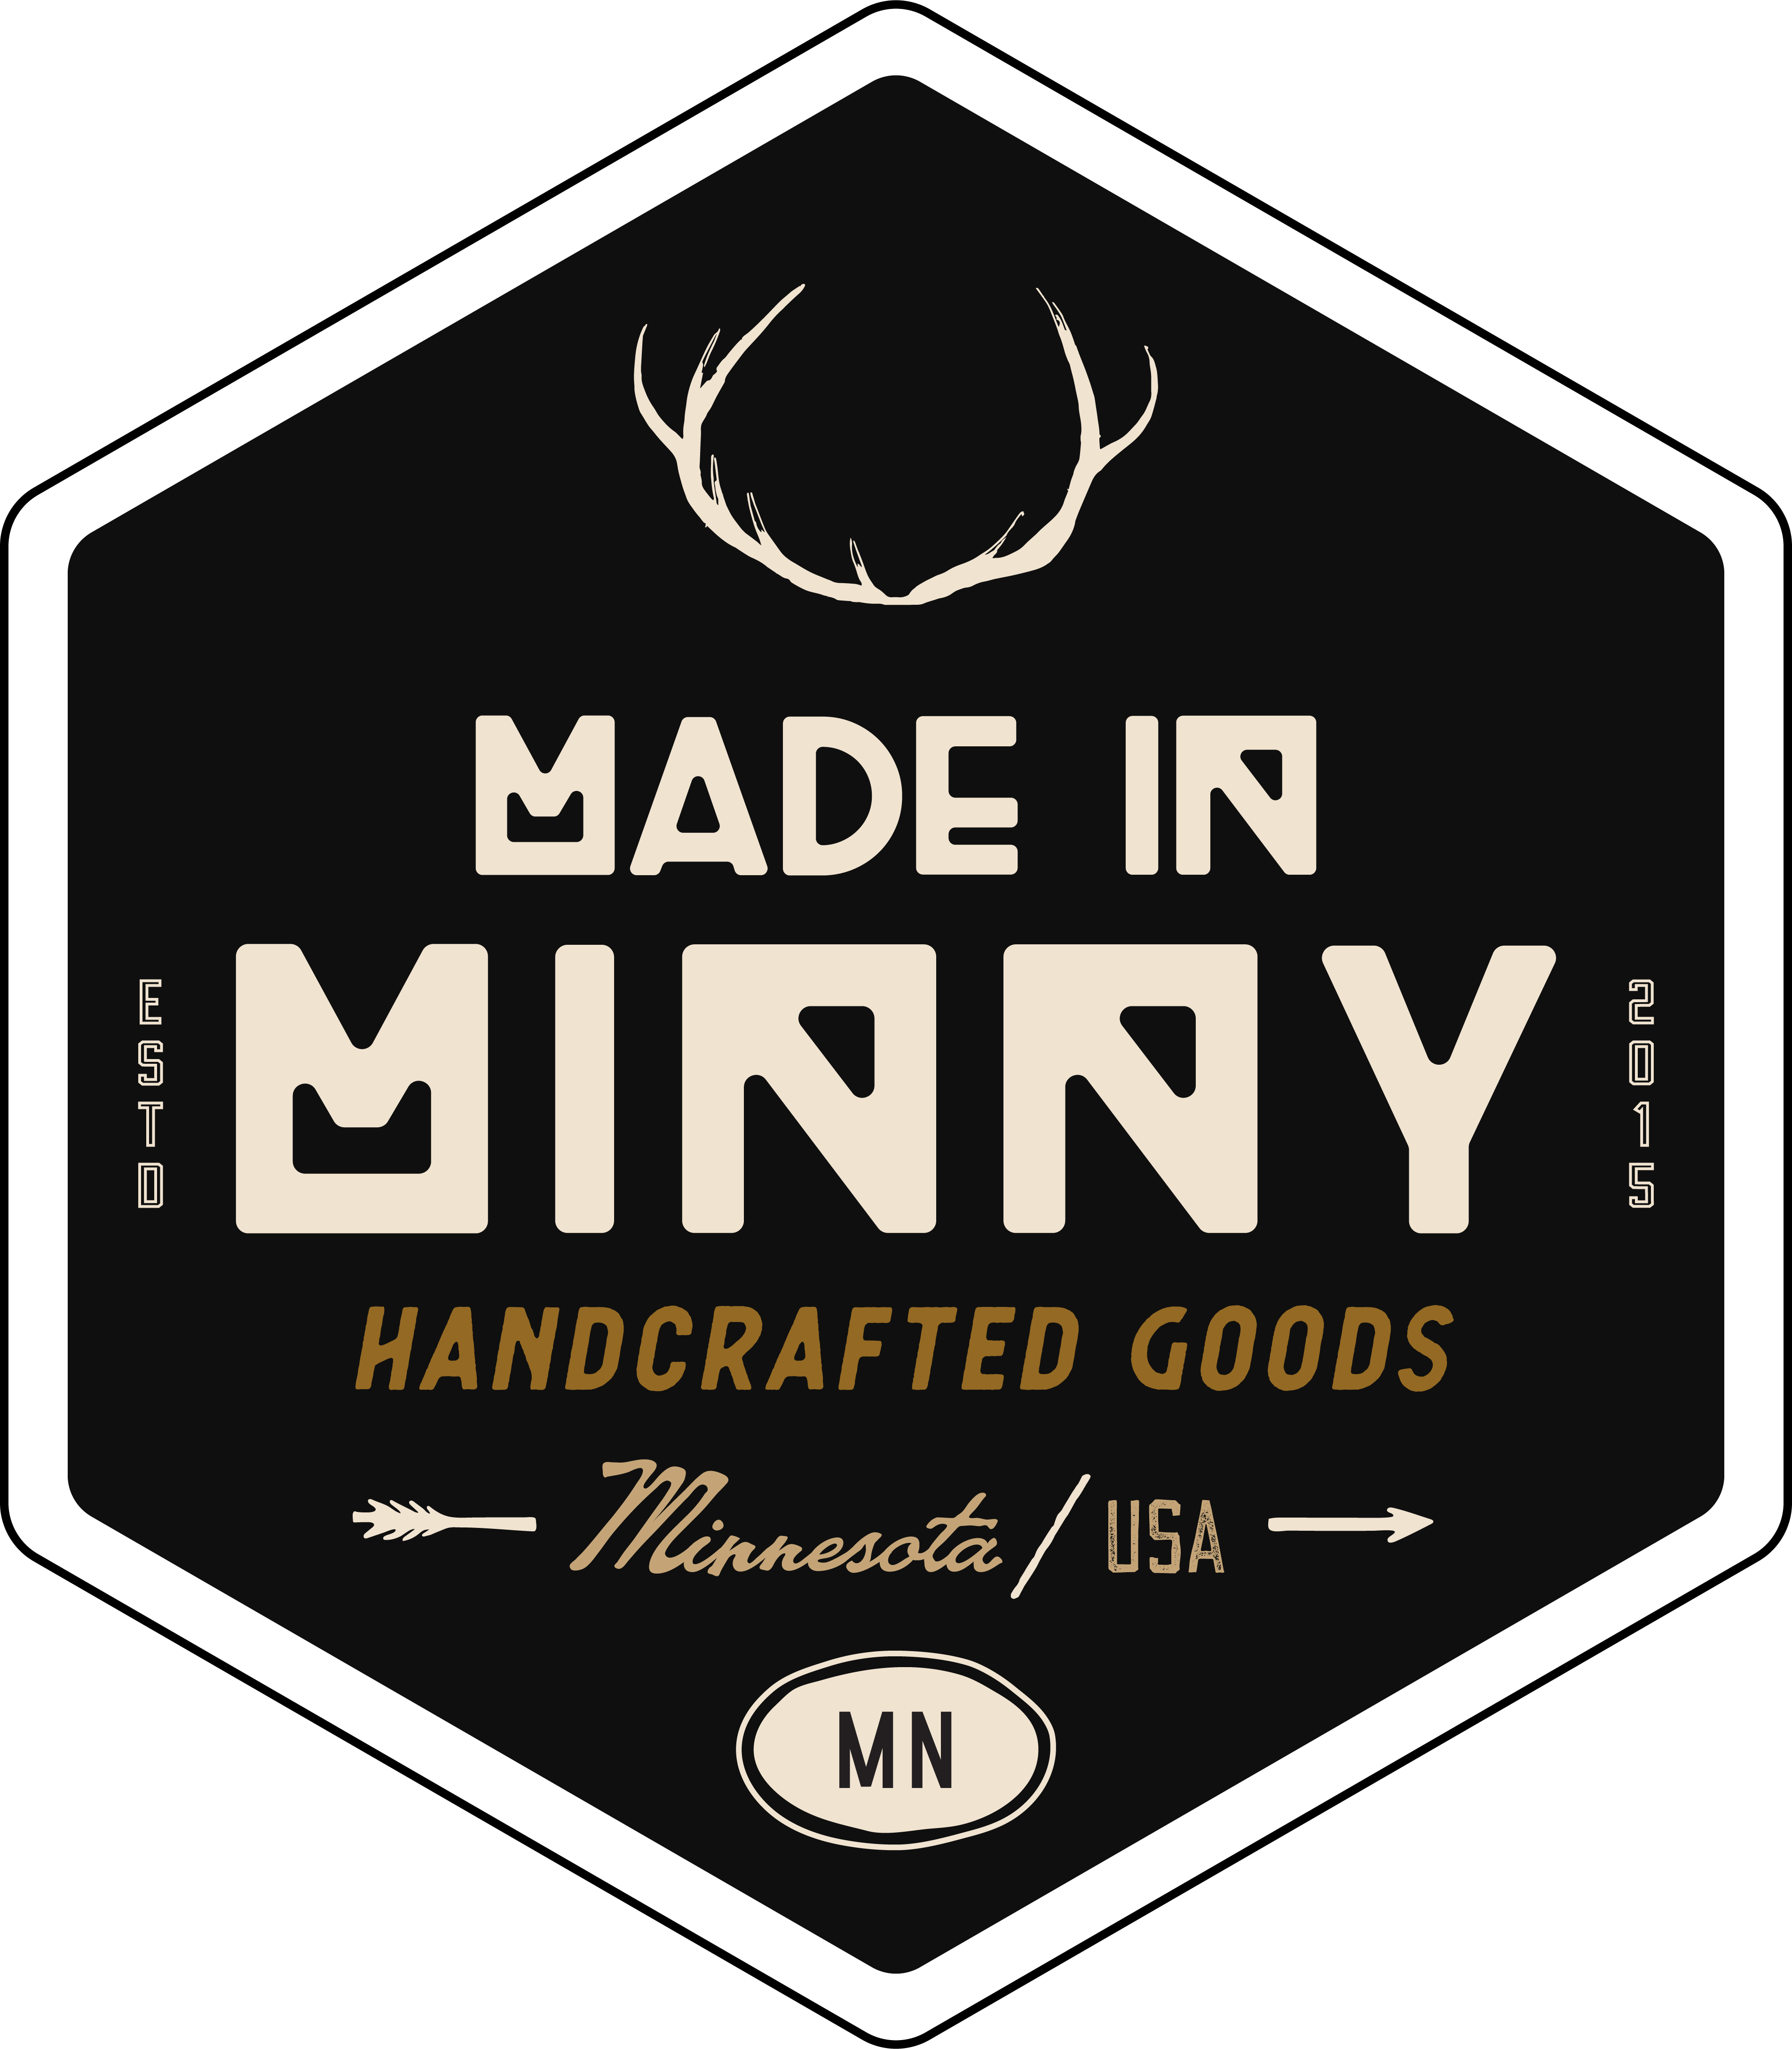 Made in Minny